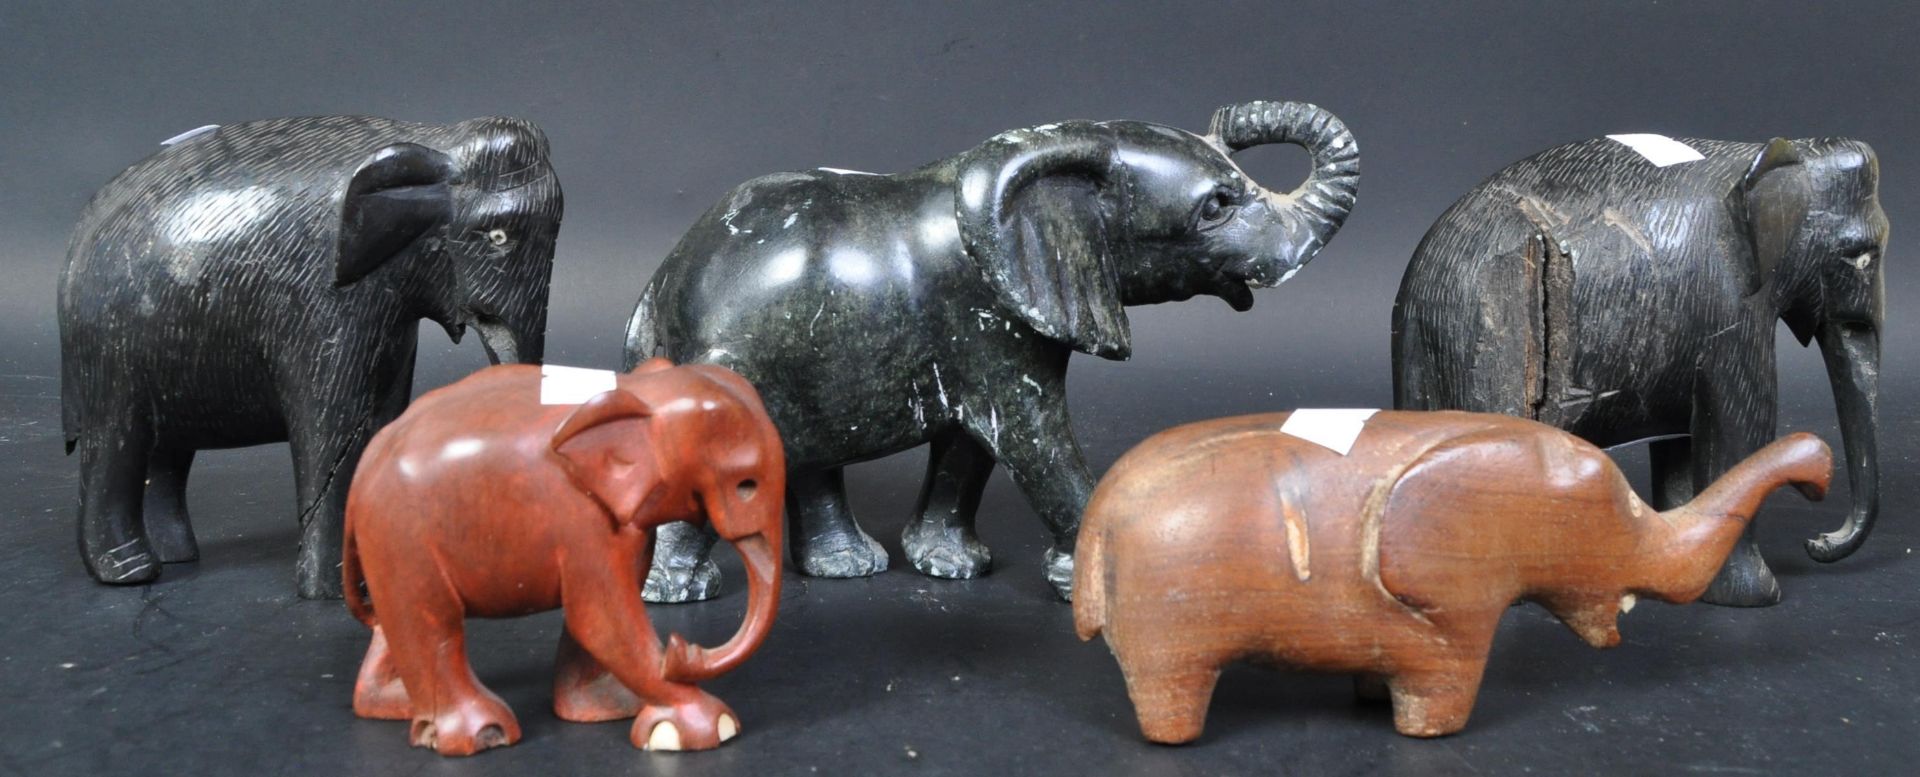 COLLECTION OF FIVE WOODEN ELEPHANT STATUES - Image 3 of 5